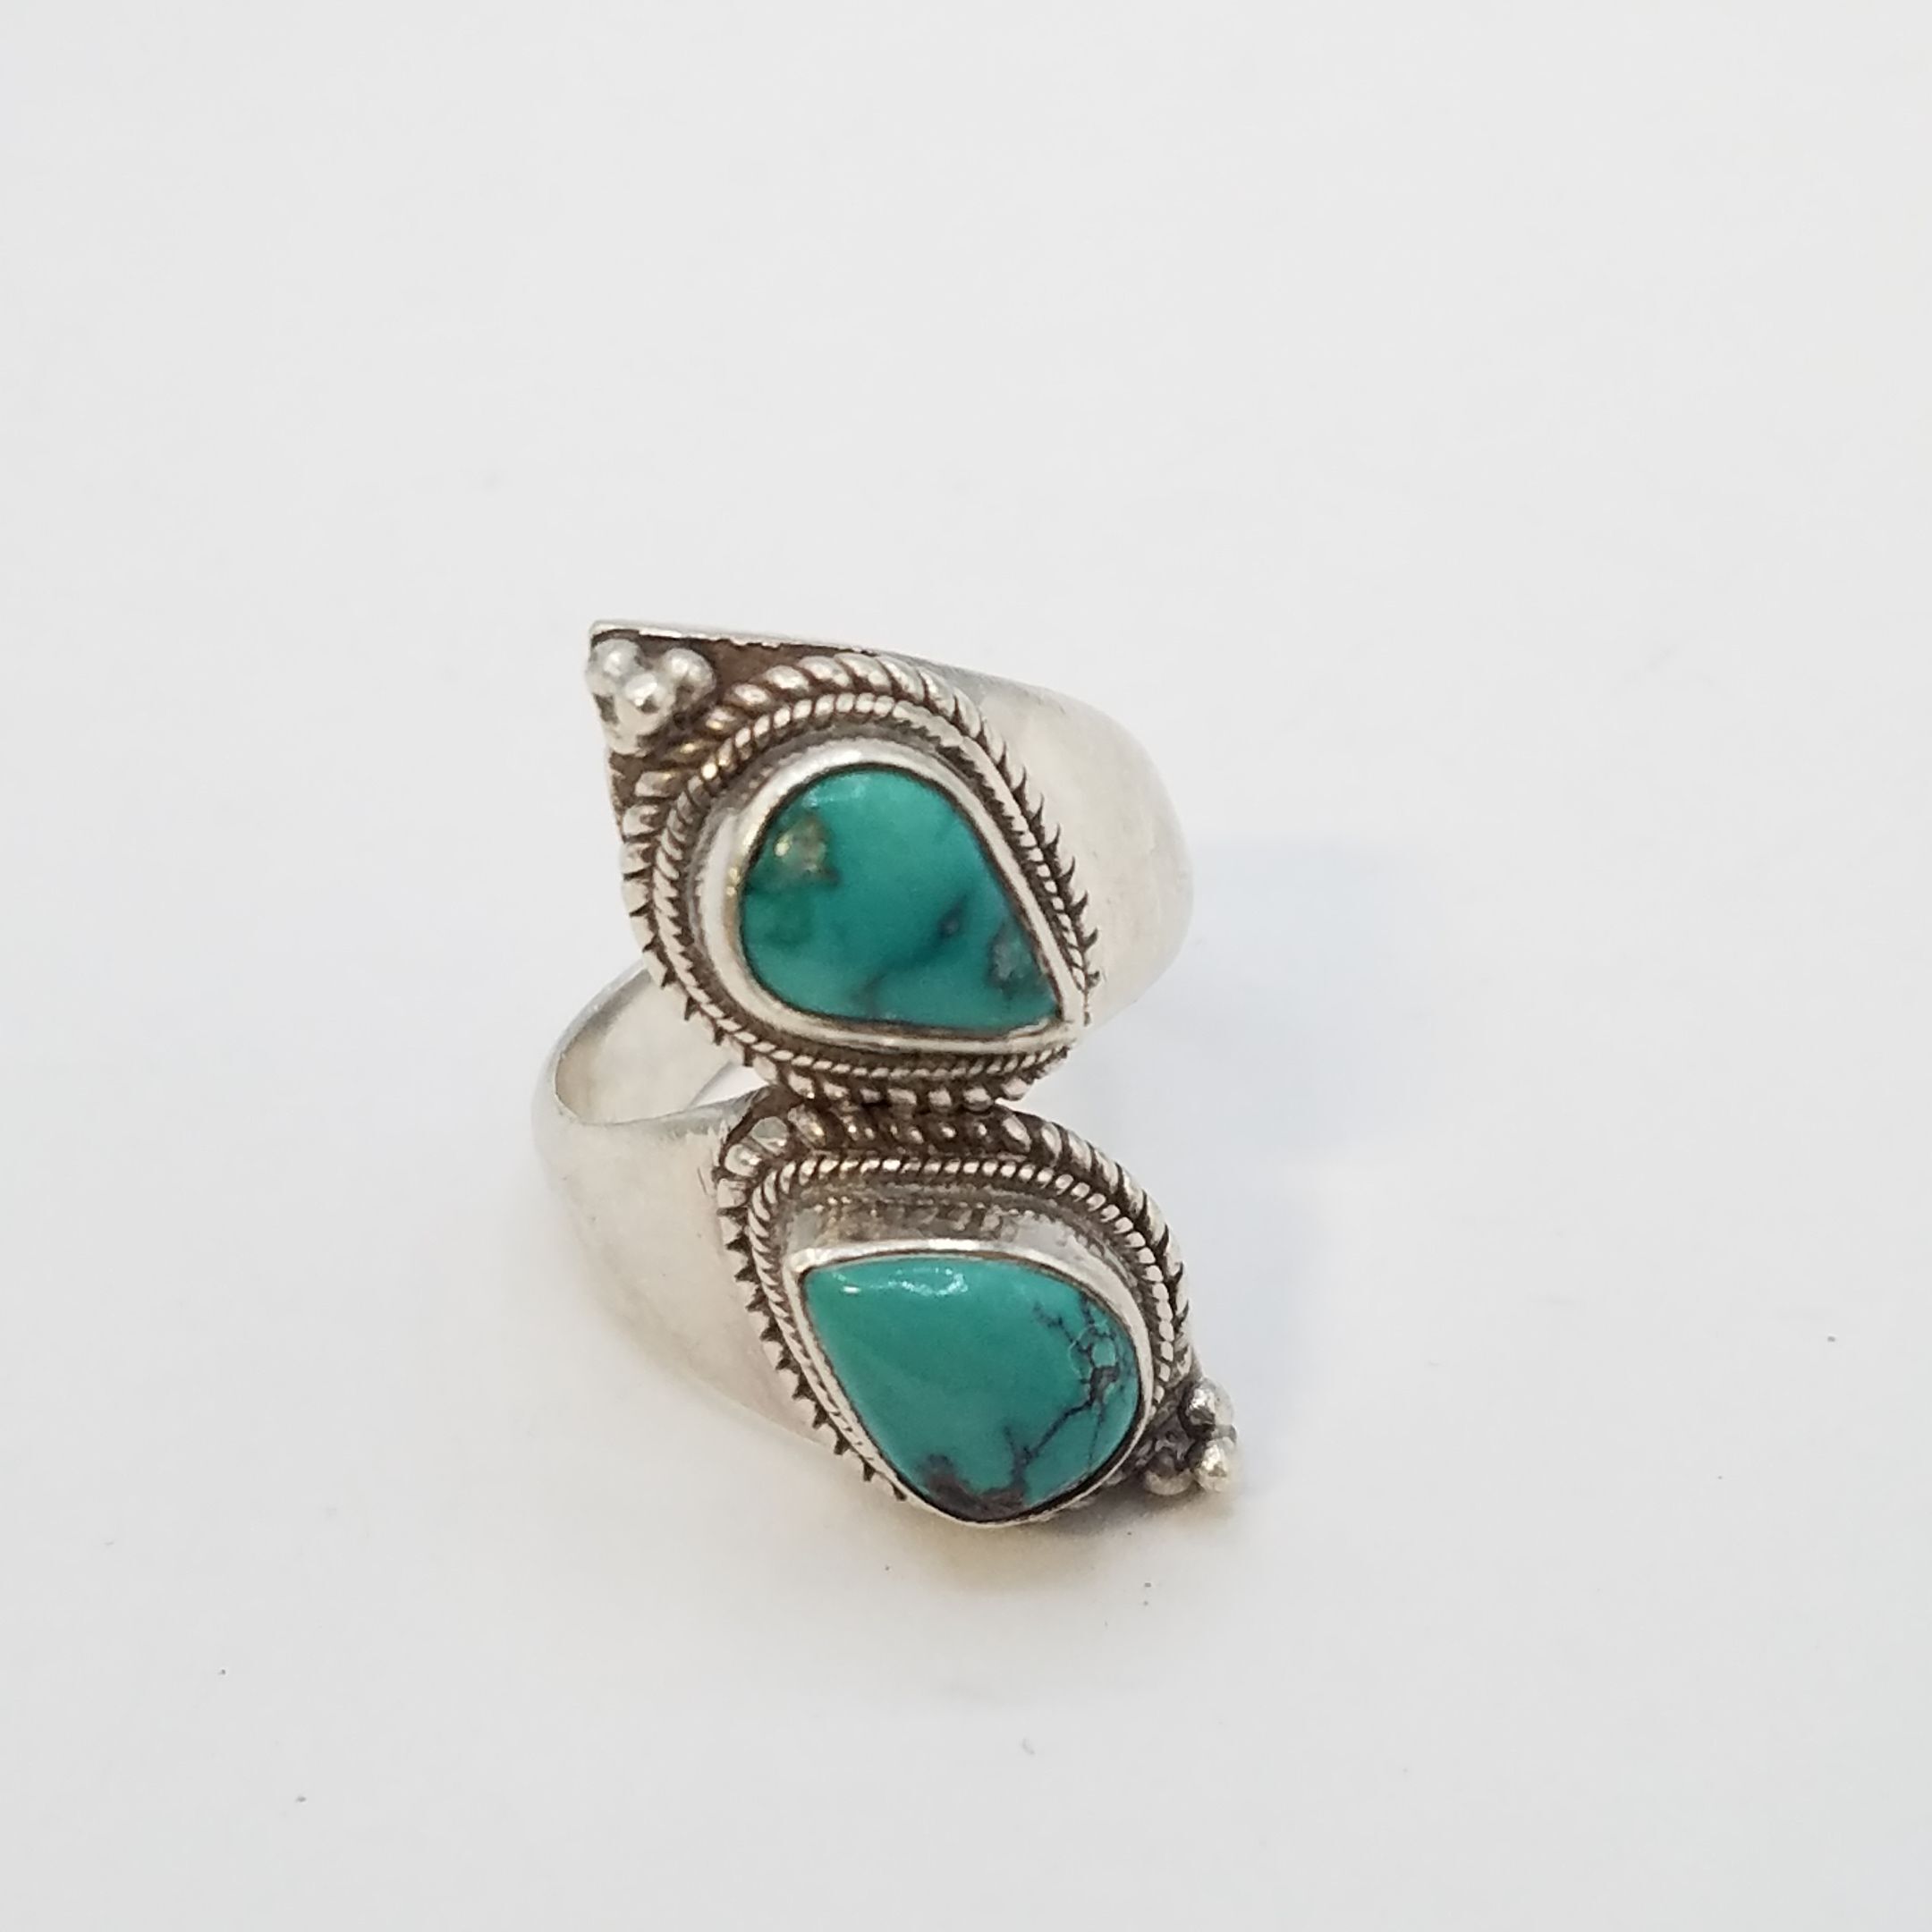 Turquoise Southwest Sterling Silver Ring Size 4-1/2 WX62162